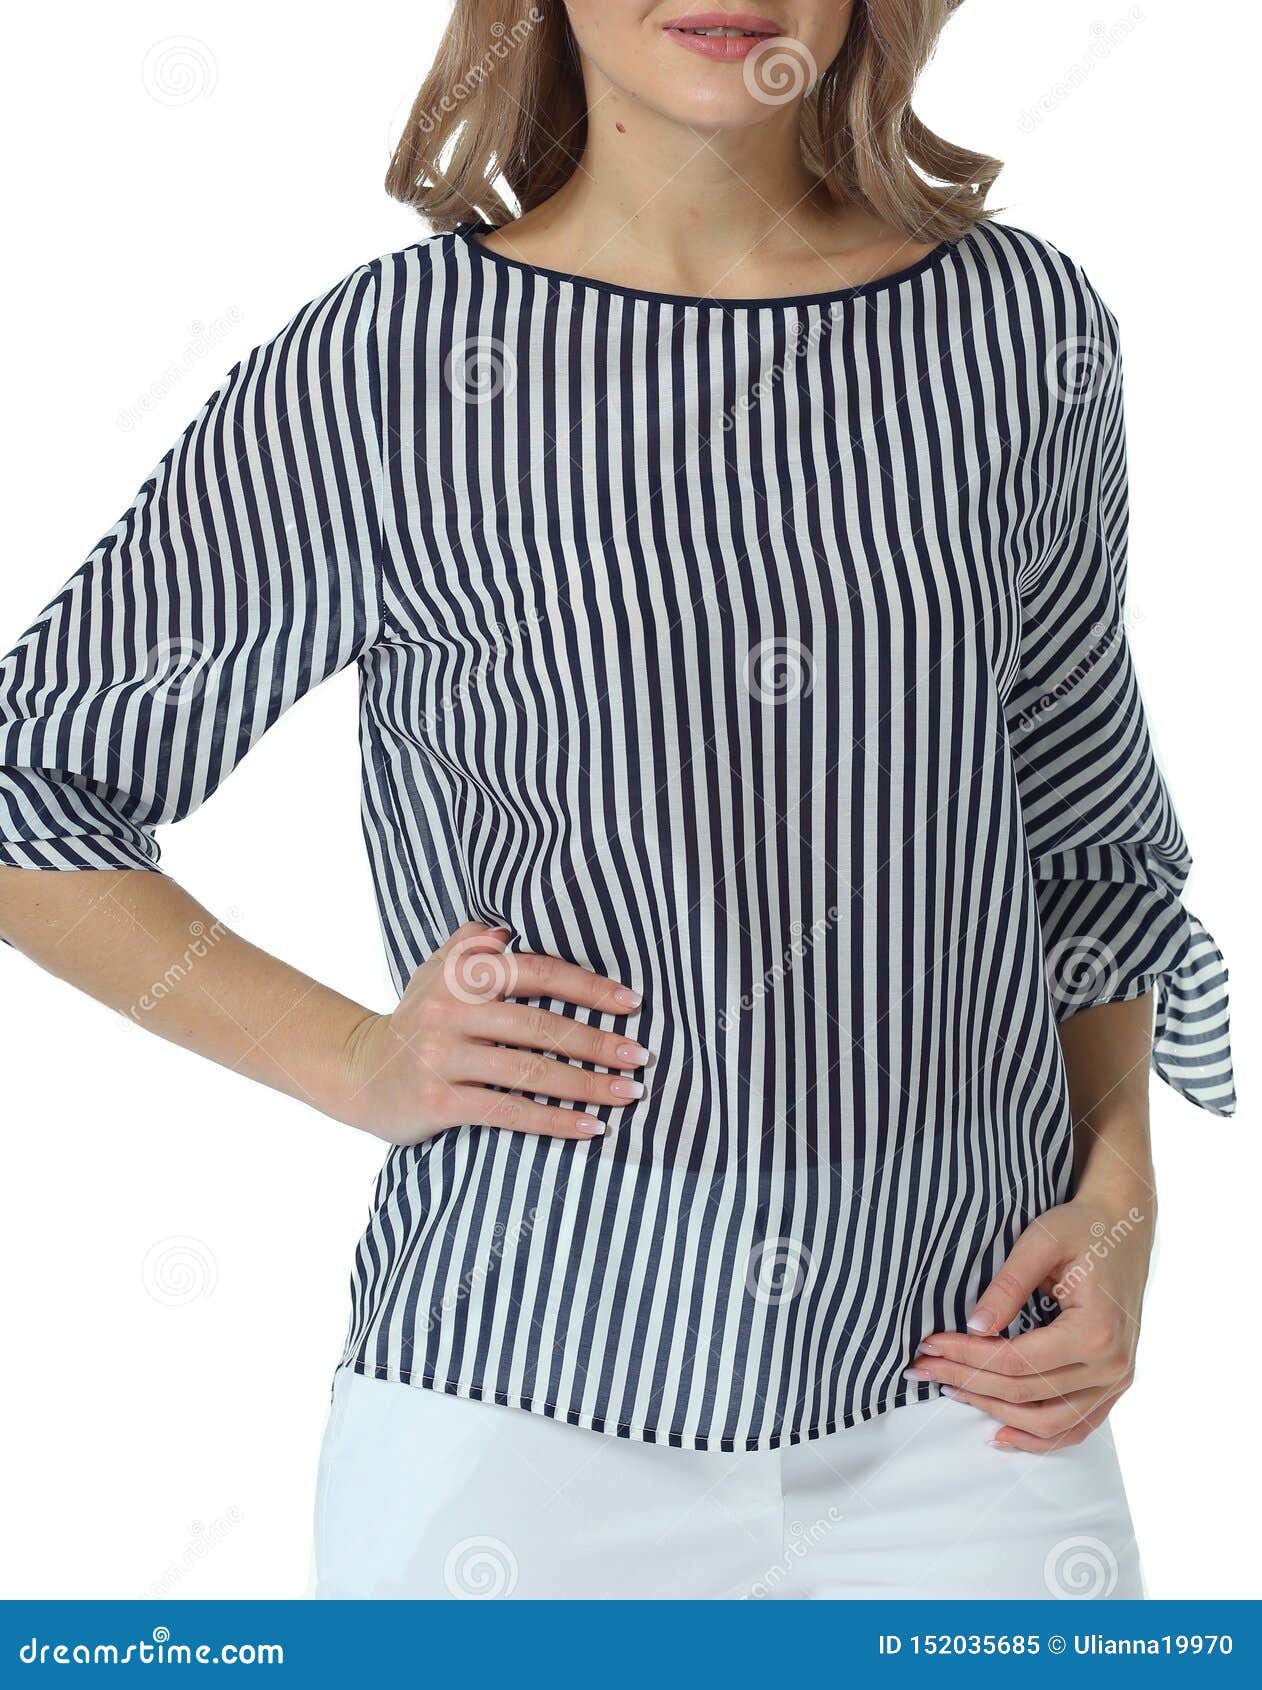 Striped Casual Formal Blouse On Model Close Up Photo Stock Image